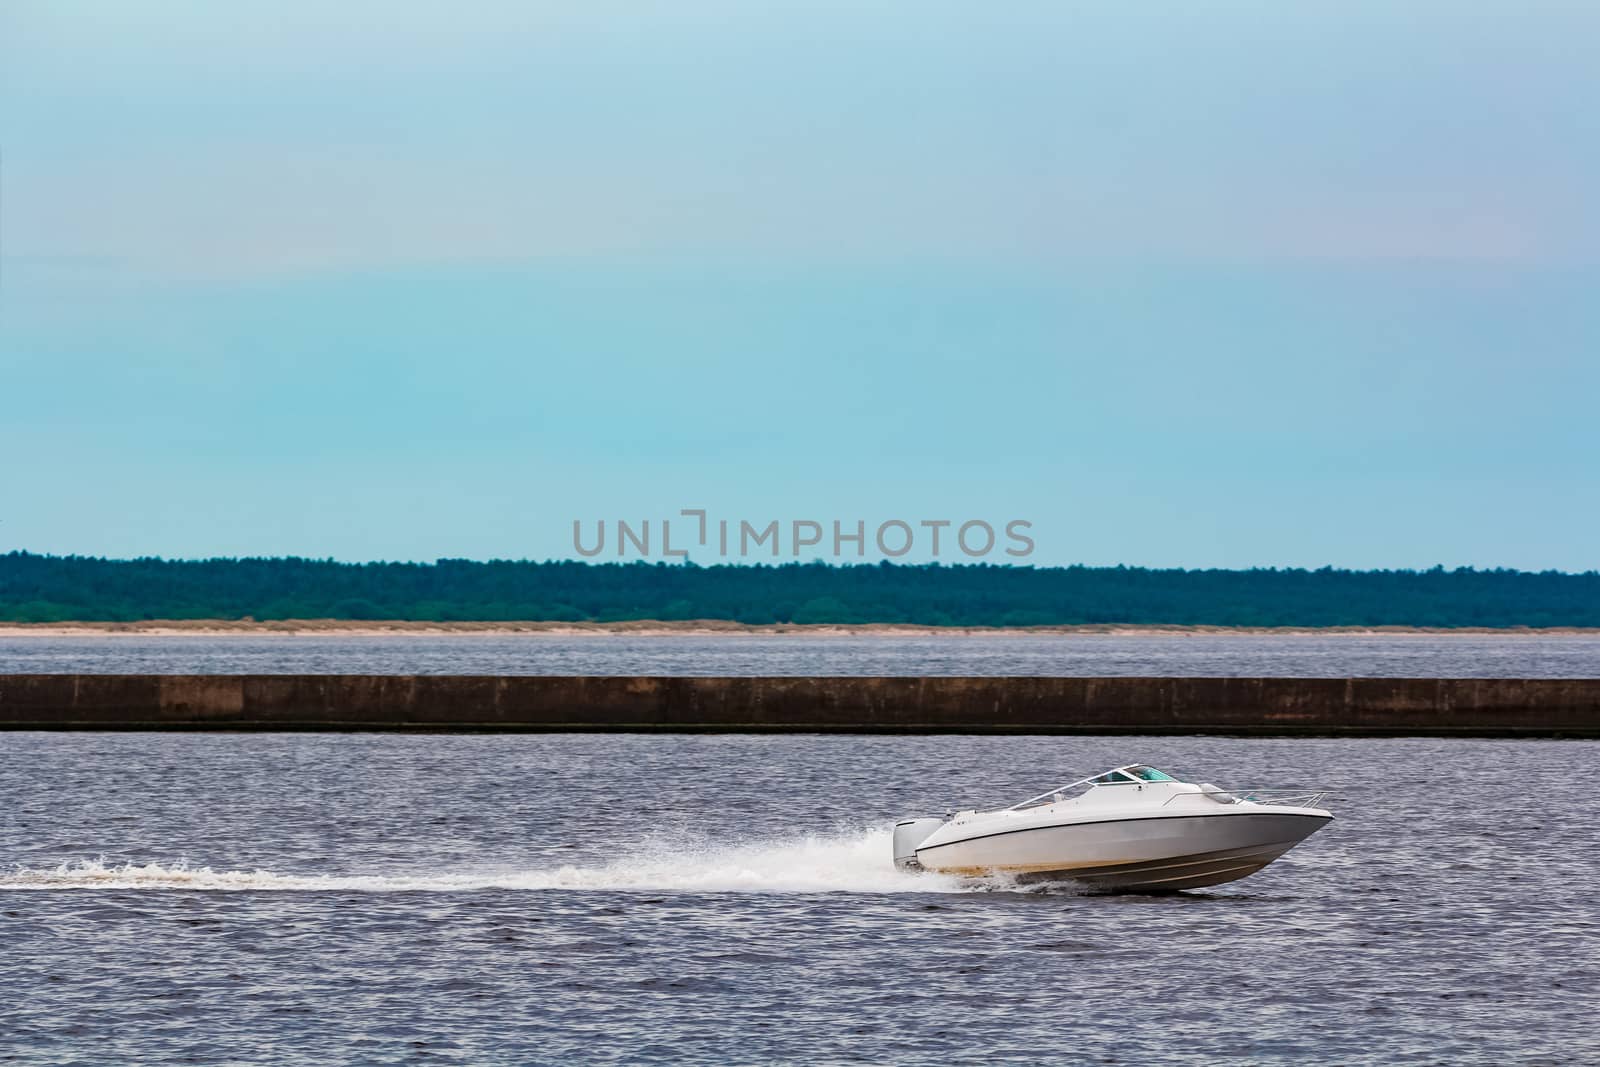 White speed boat in action by sengnsp